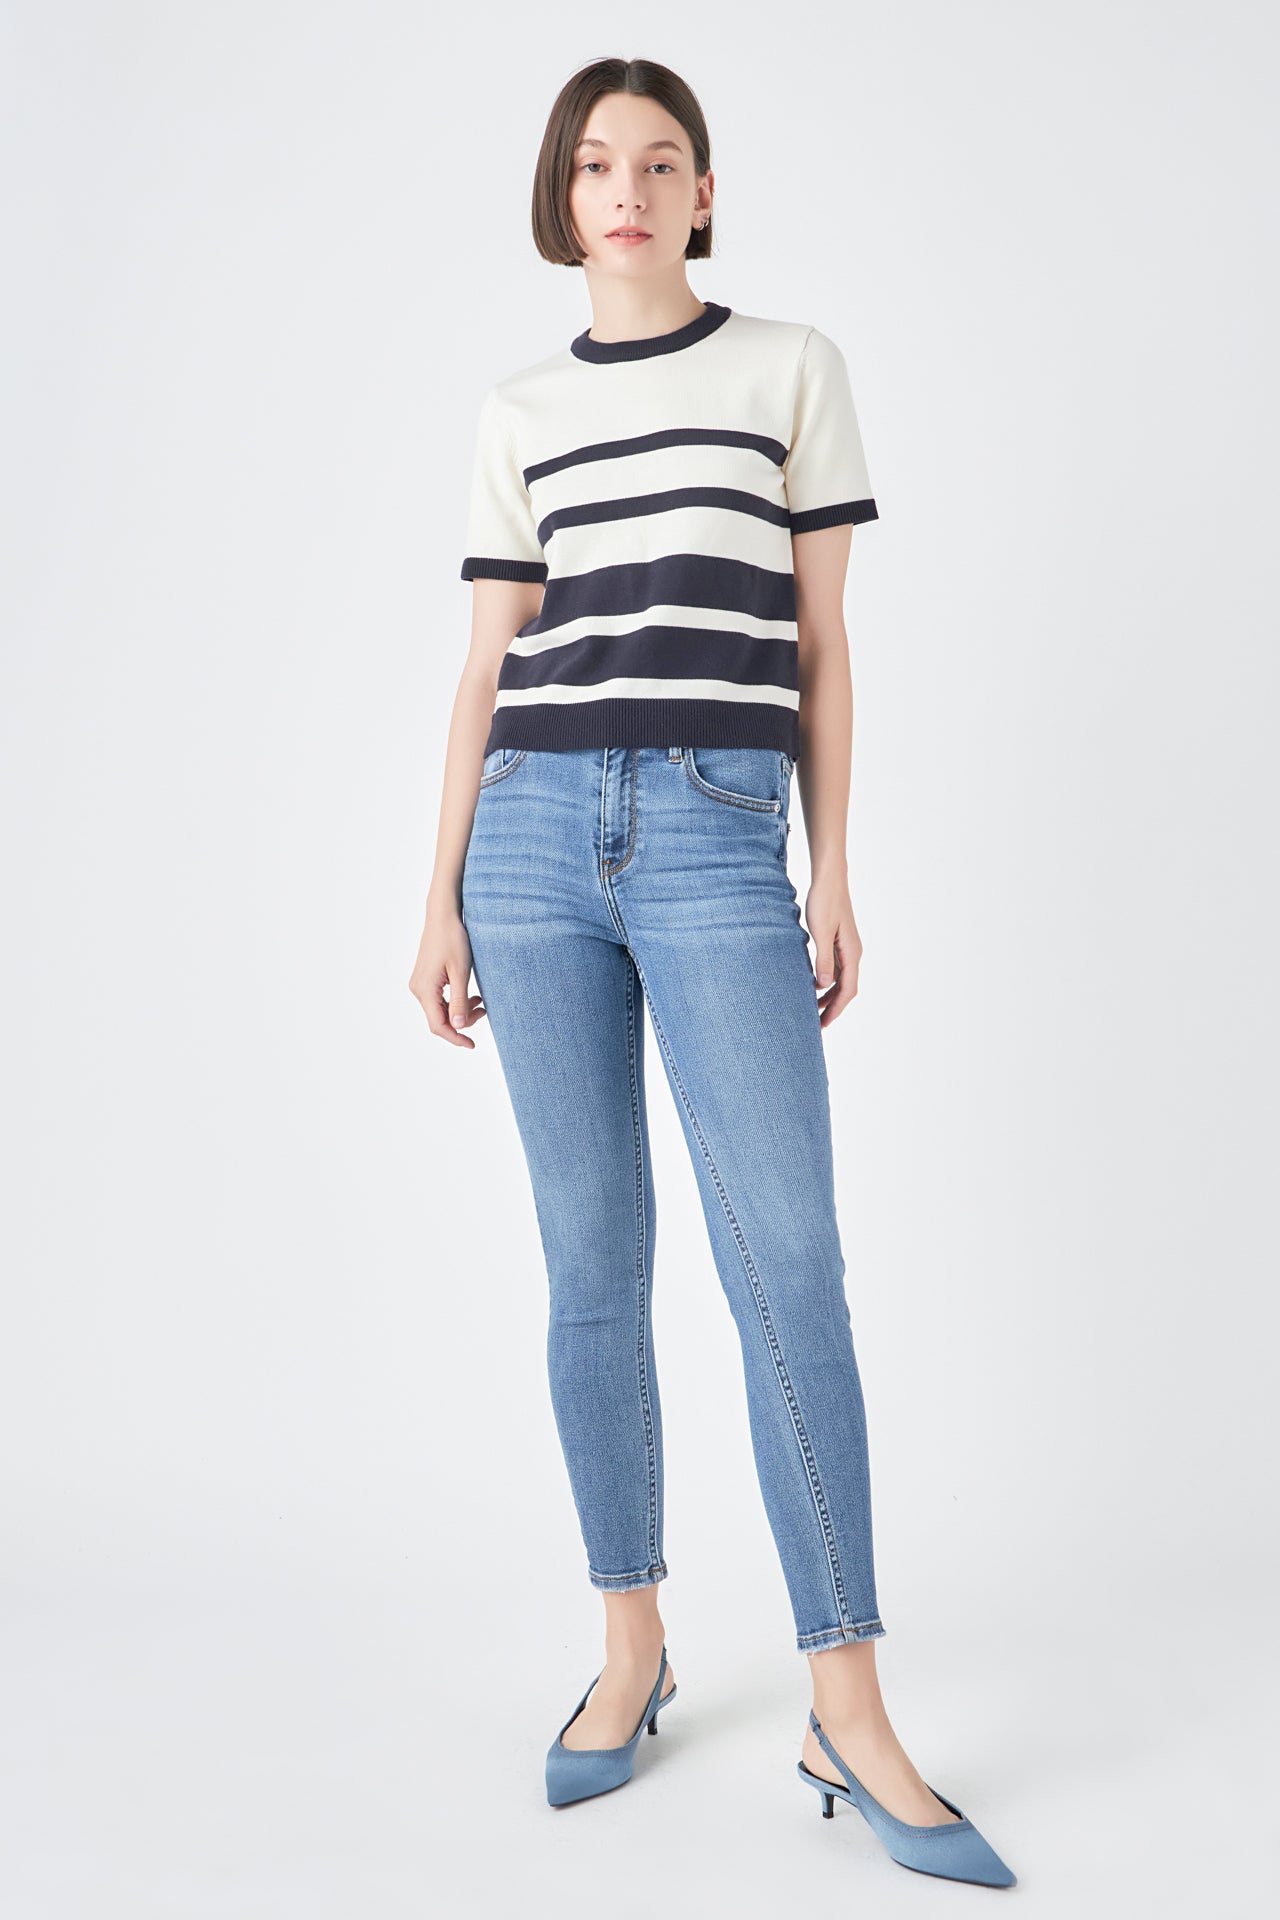 ENGLISH FACTORY - Stripe Short Sleeve Knit Top - TOPS available at Objectrare